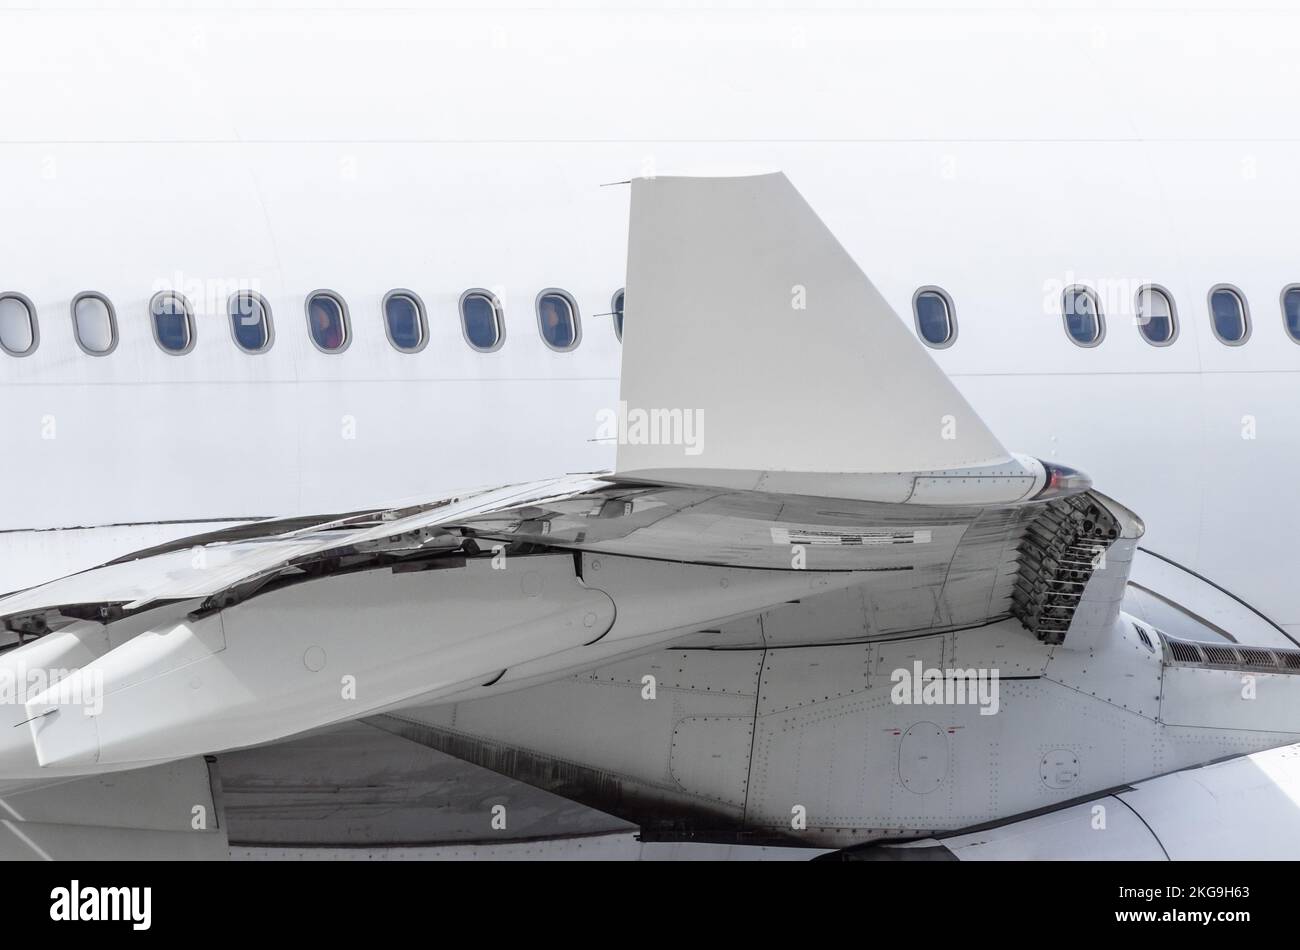 View of the wing tip of the aircraft and the fuselage with portholes. Stock Photo